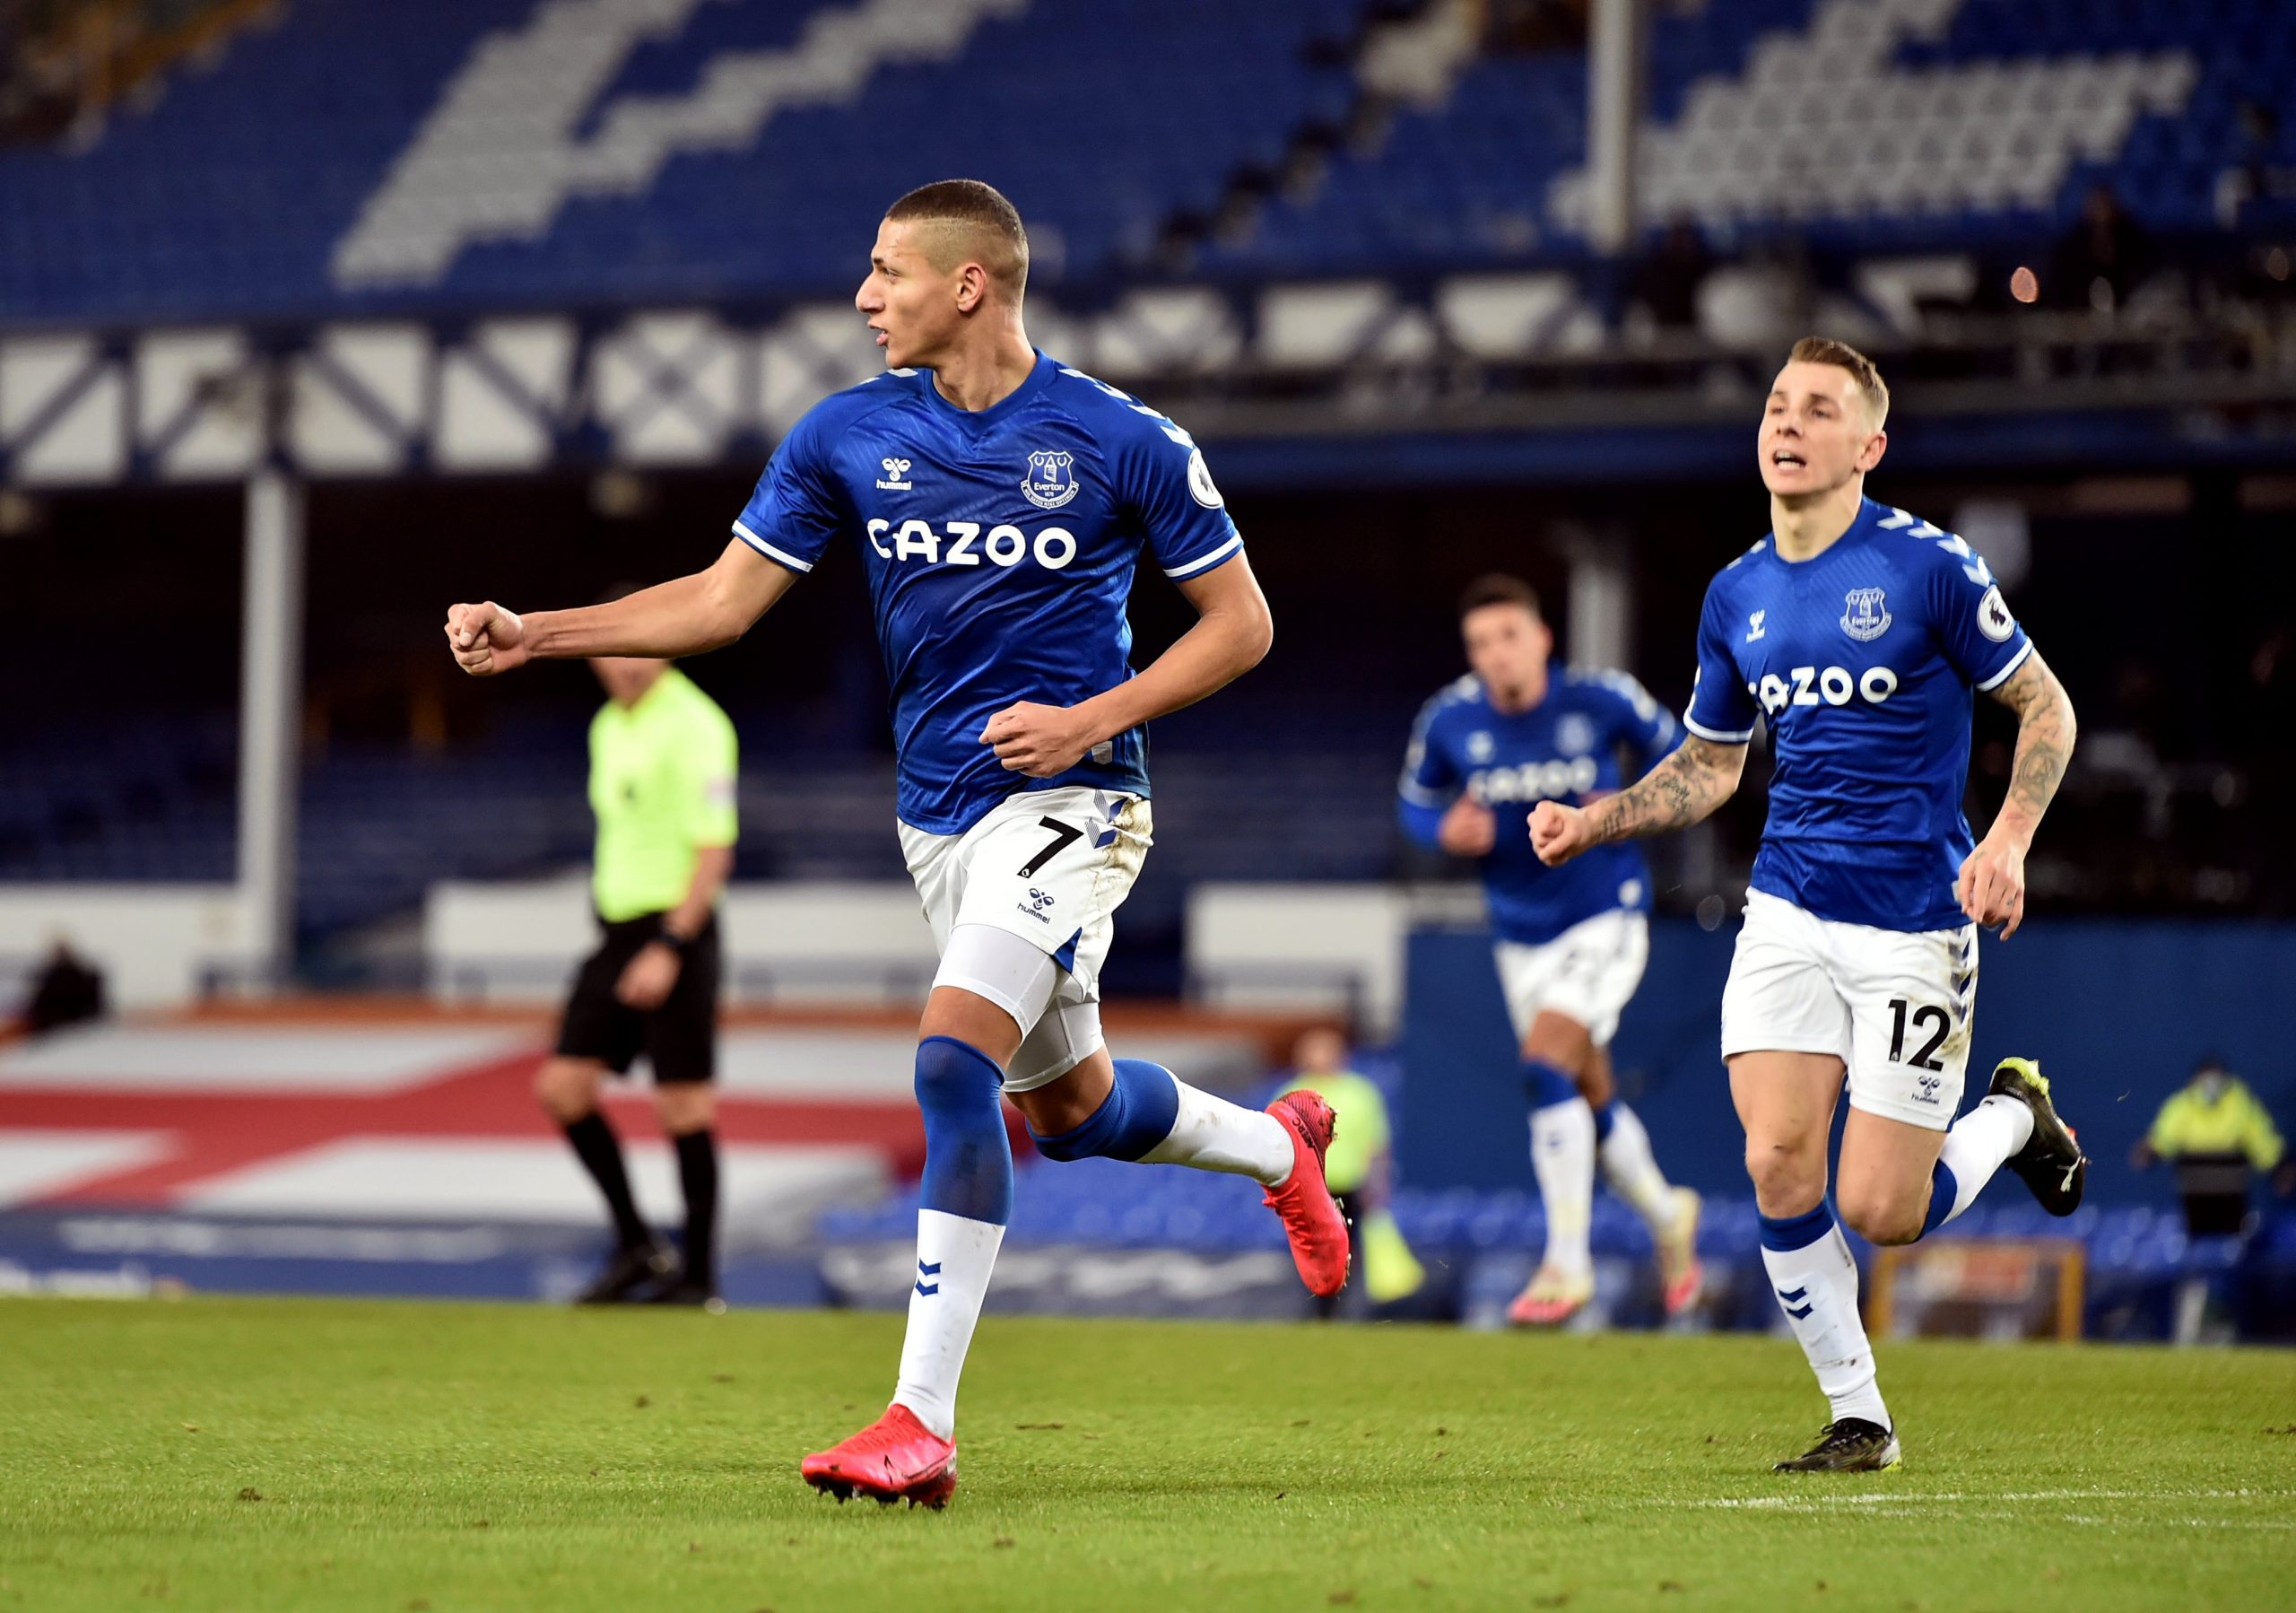 2/17/2021 - Everton's Richarlison celebrates scoring their sides first goal to level the score at 1-1 during the Premier League match at Goodison Park, Liverpool. Picture date: Wednesday February 17, 2021.